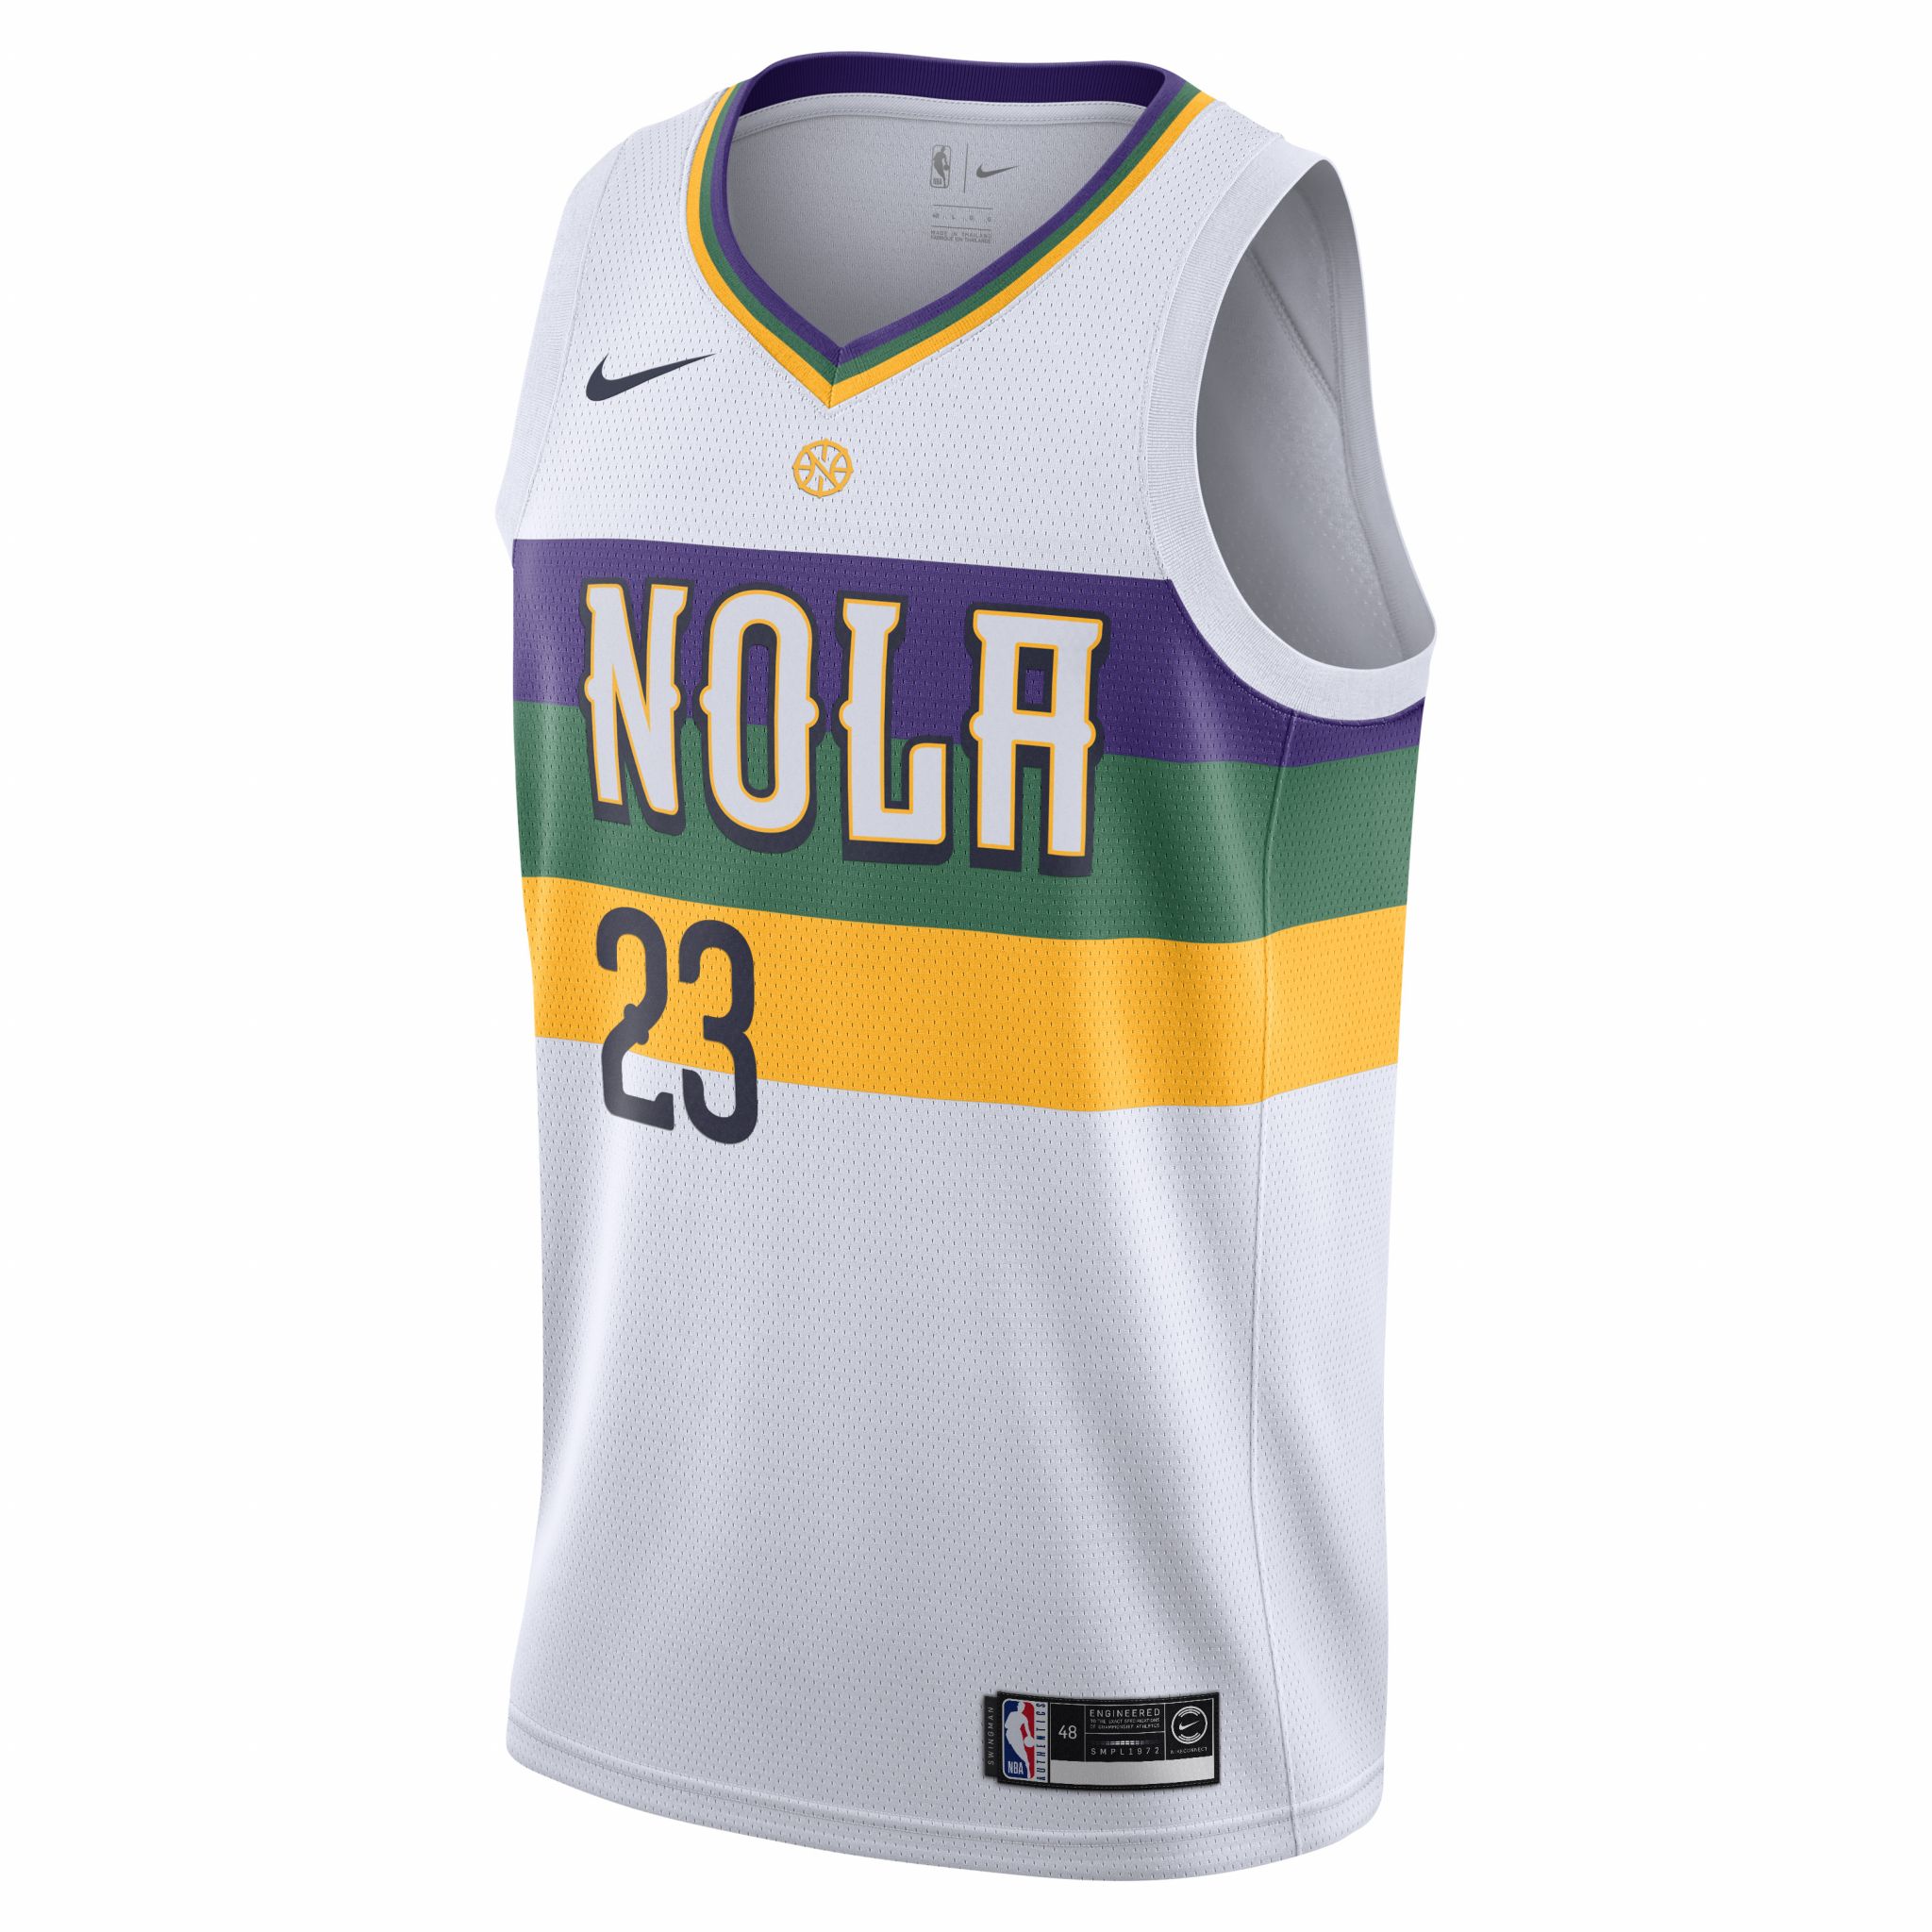 A look at every team's NBA 'City' uniforms this season